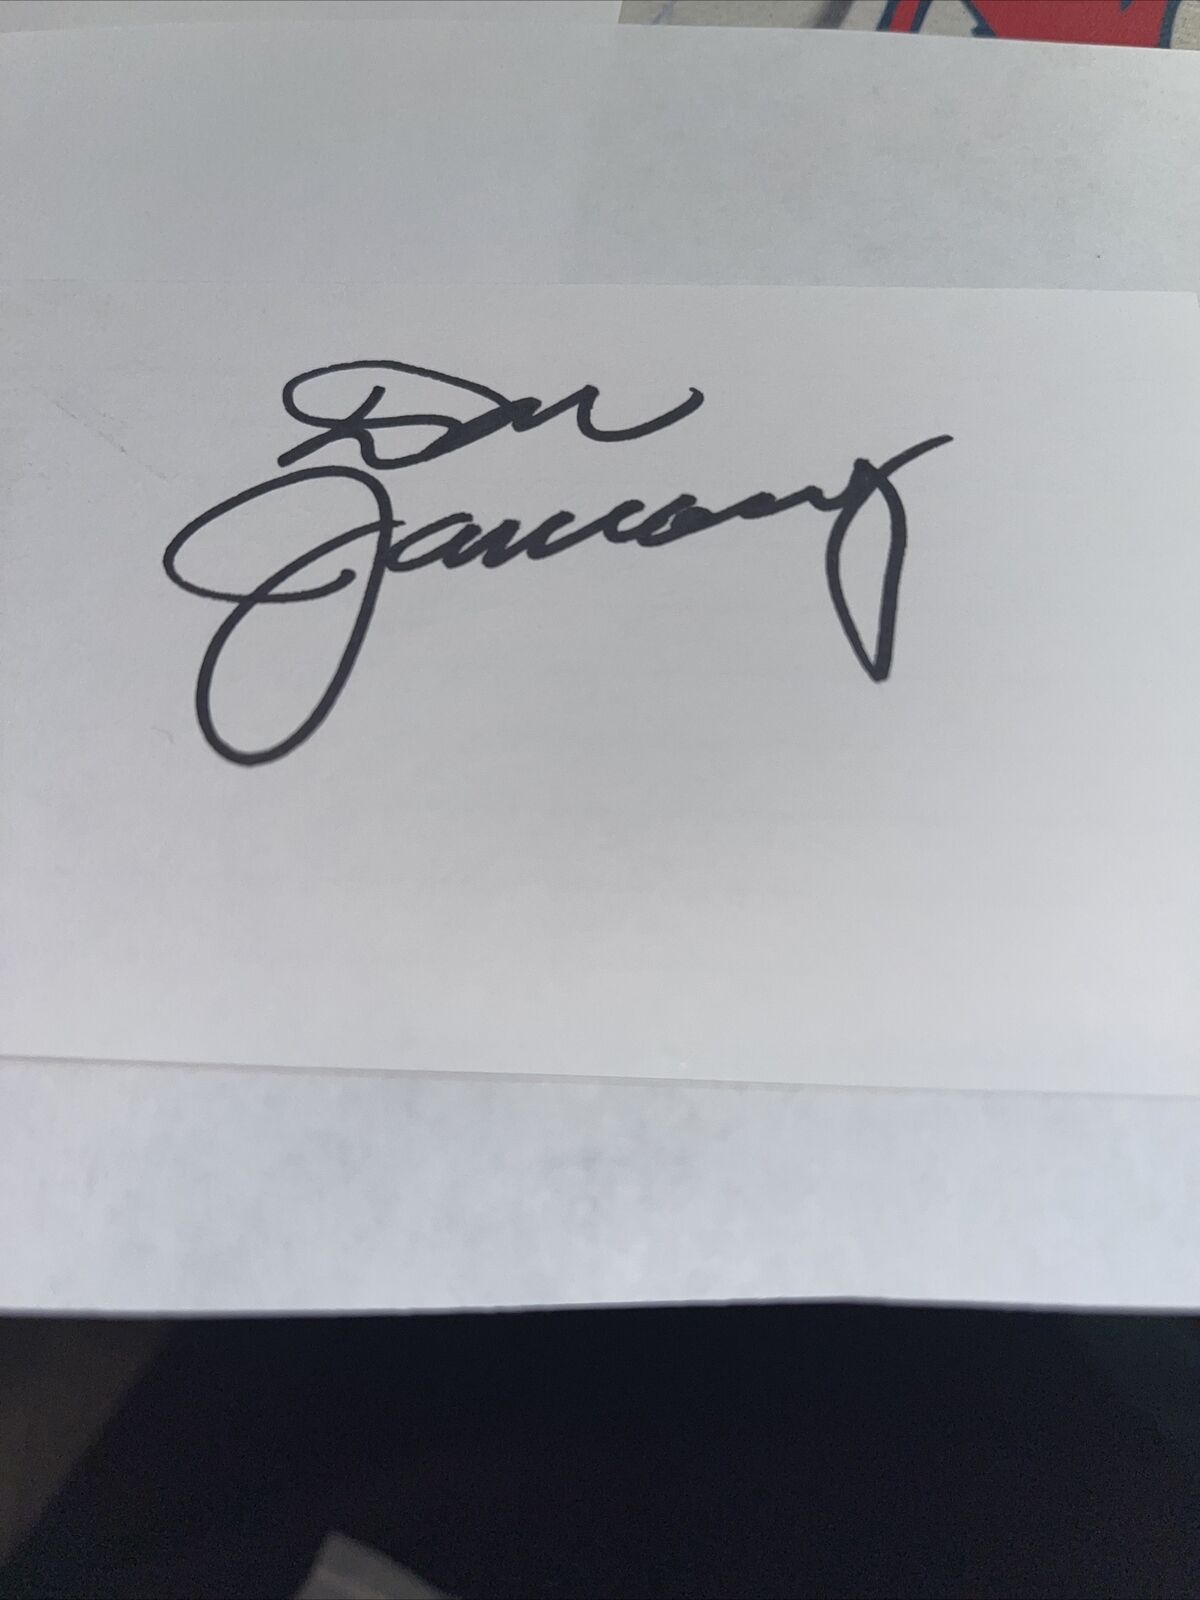 Don January Signed 3x5 Index Card